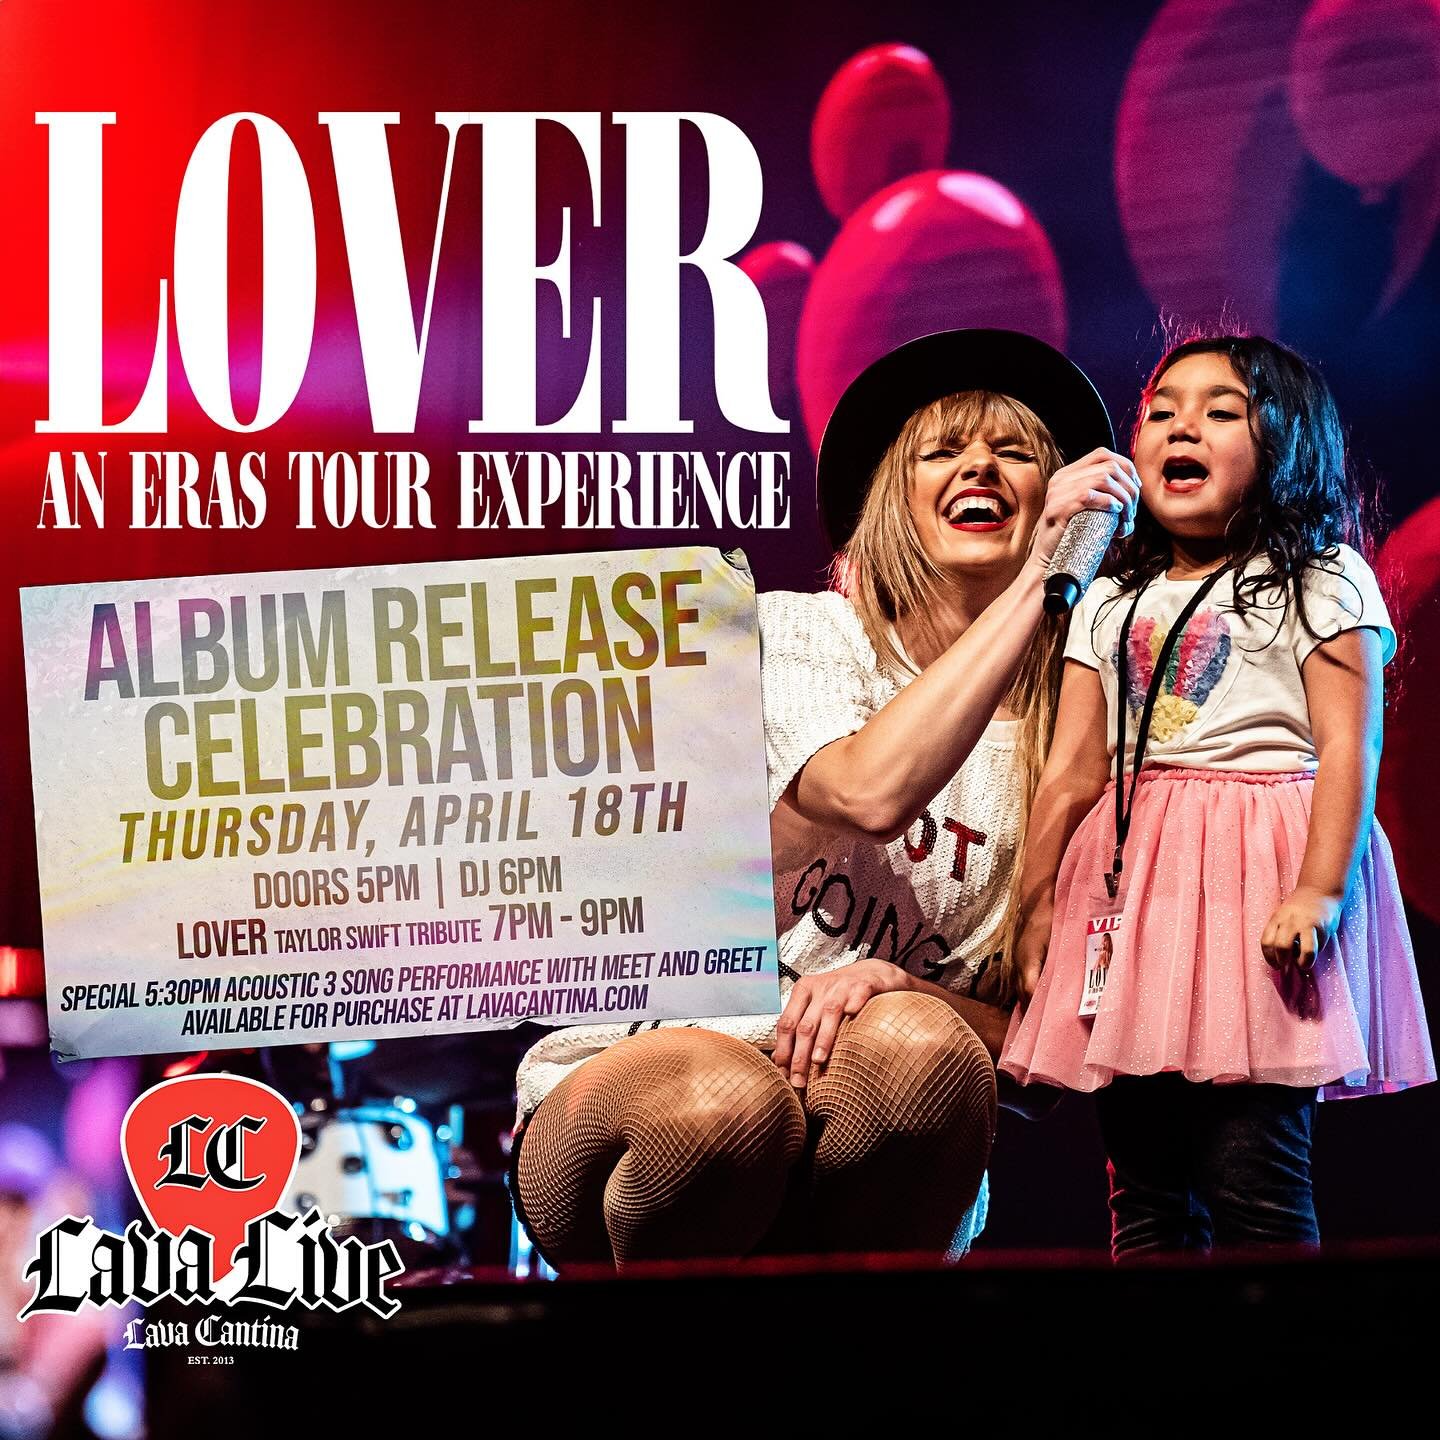 🚨 THURSDAY, APRIL 18TH @lavacantinatc 🚨

LIVE BAND KARAOKE
with Shannon Cobb 
💀Lava Cantina&rsquo;s Voodoo Lounge
AGES: All Ages
7 PM - 9:30 PM
🎟️🎟️➡️ NO TIX NEEDED!

💥💥💥💥💥

LOVER - AN ERAS TOUR EXPERIENCE 
Taylor Swift Tribute
🔥Lava Live 